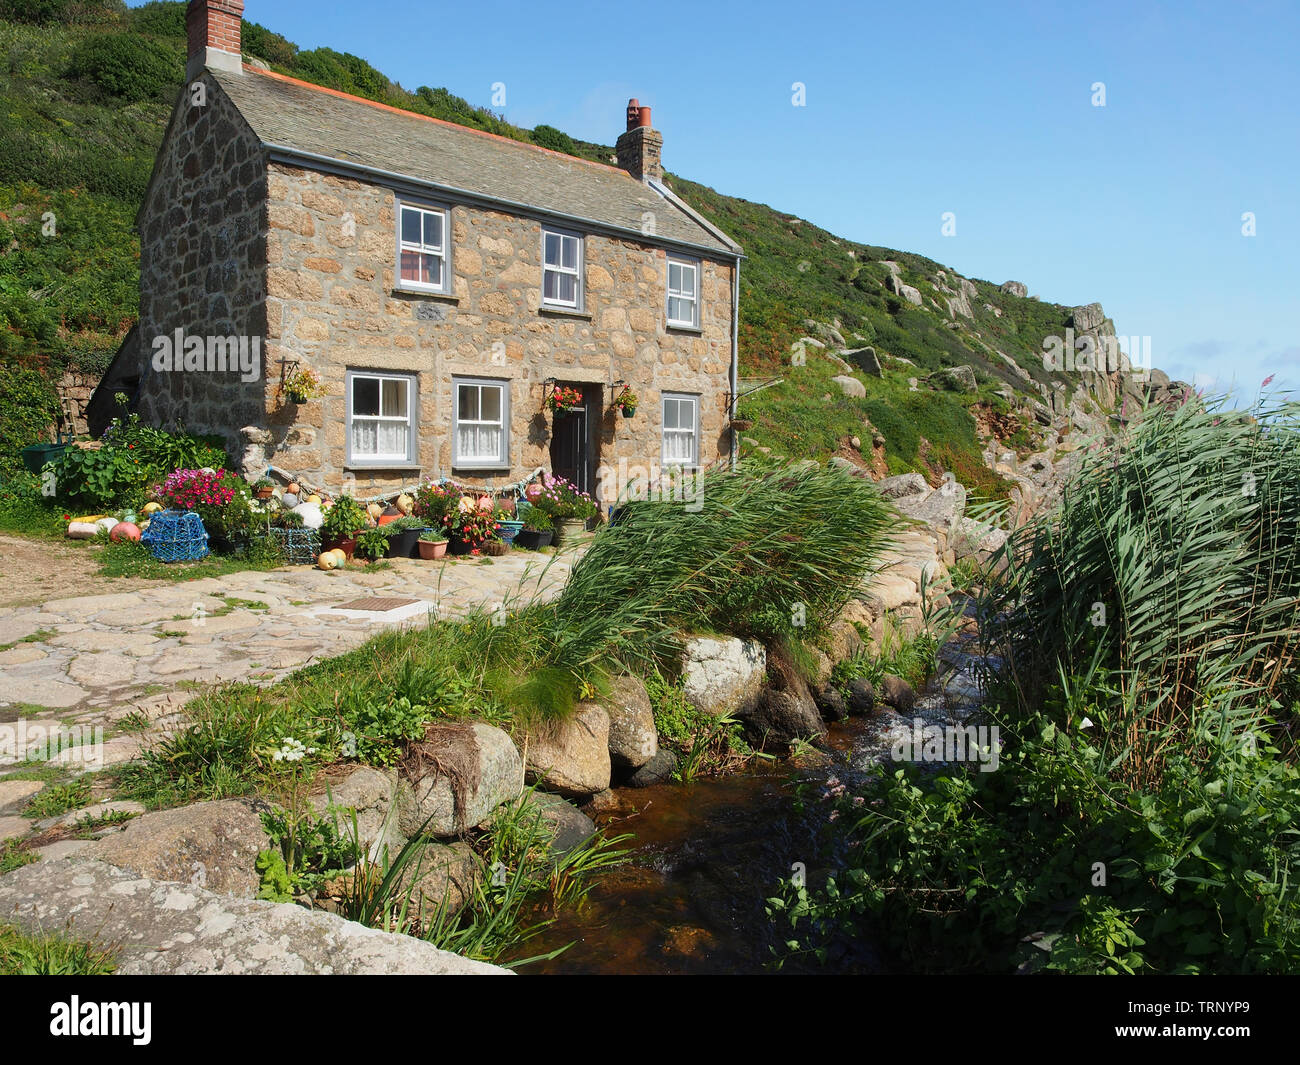 A Cottage on the quay at Penberth Cove on the Penwith Peninsula in west Cornwall, England, UK. Stock Photo